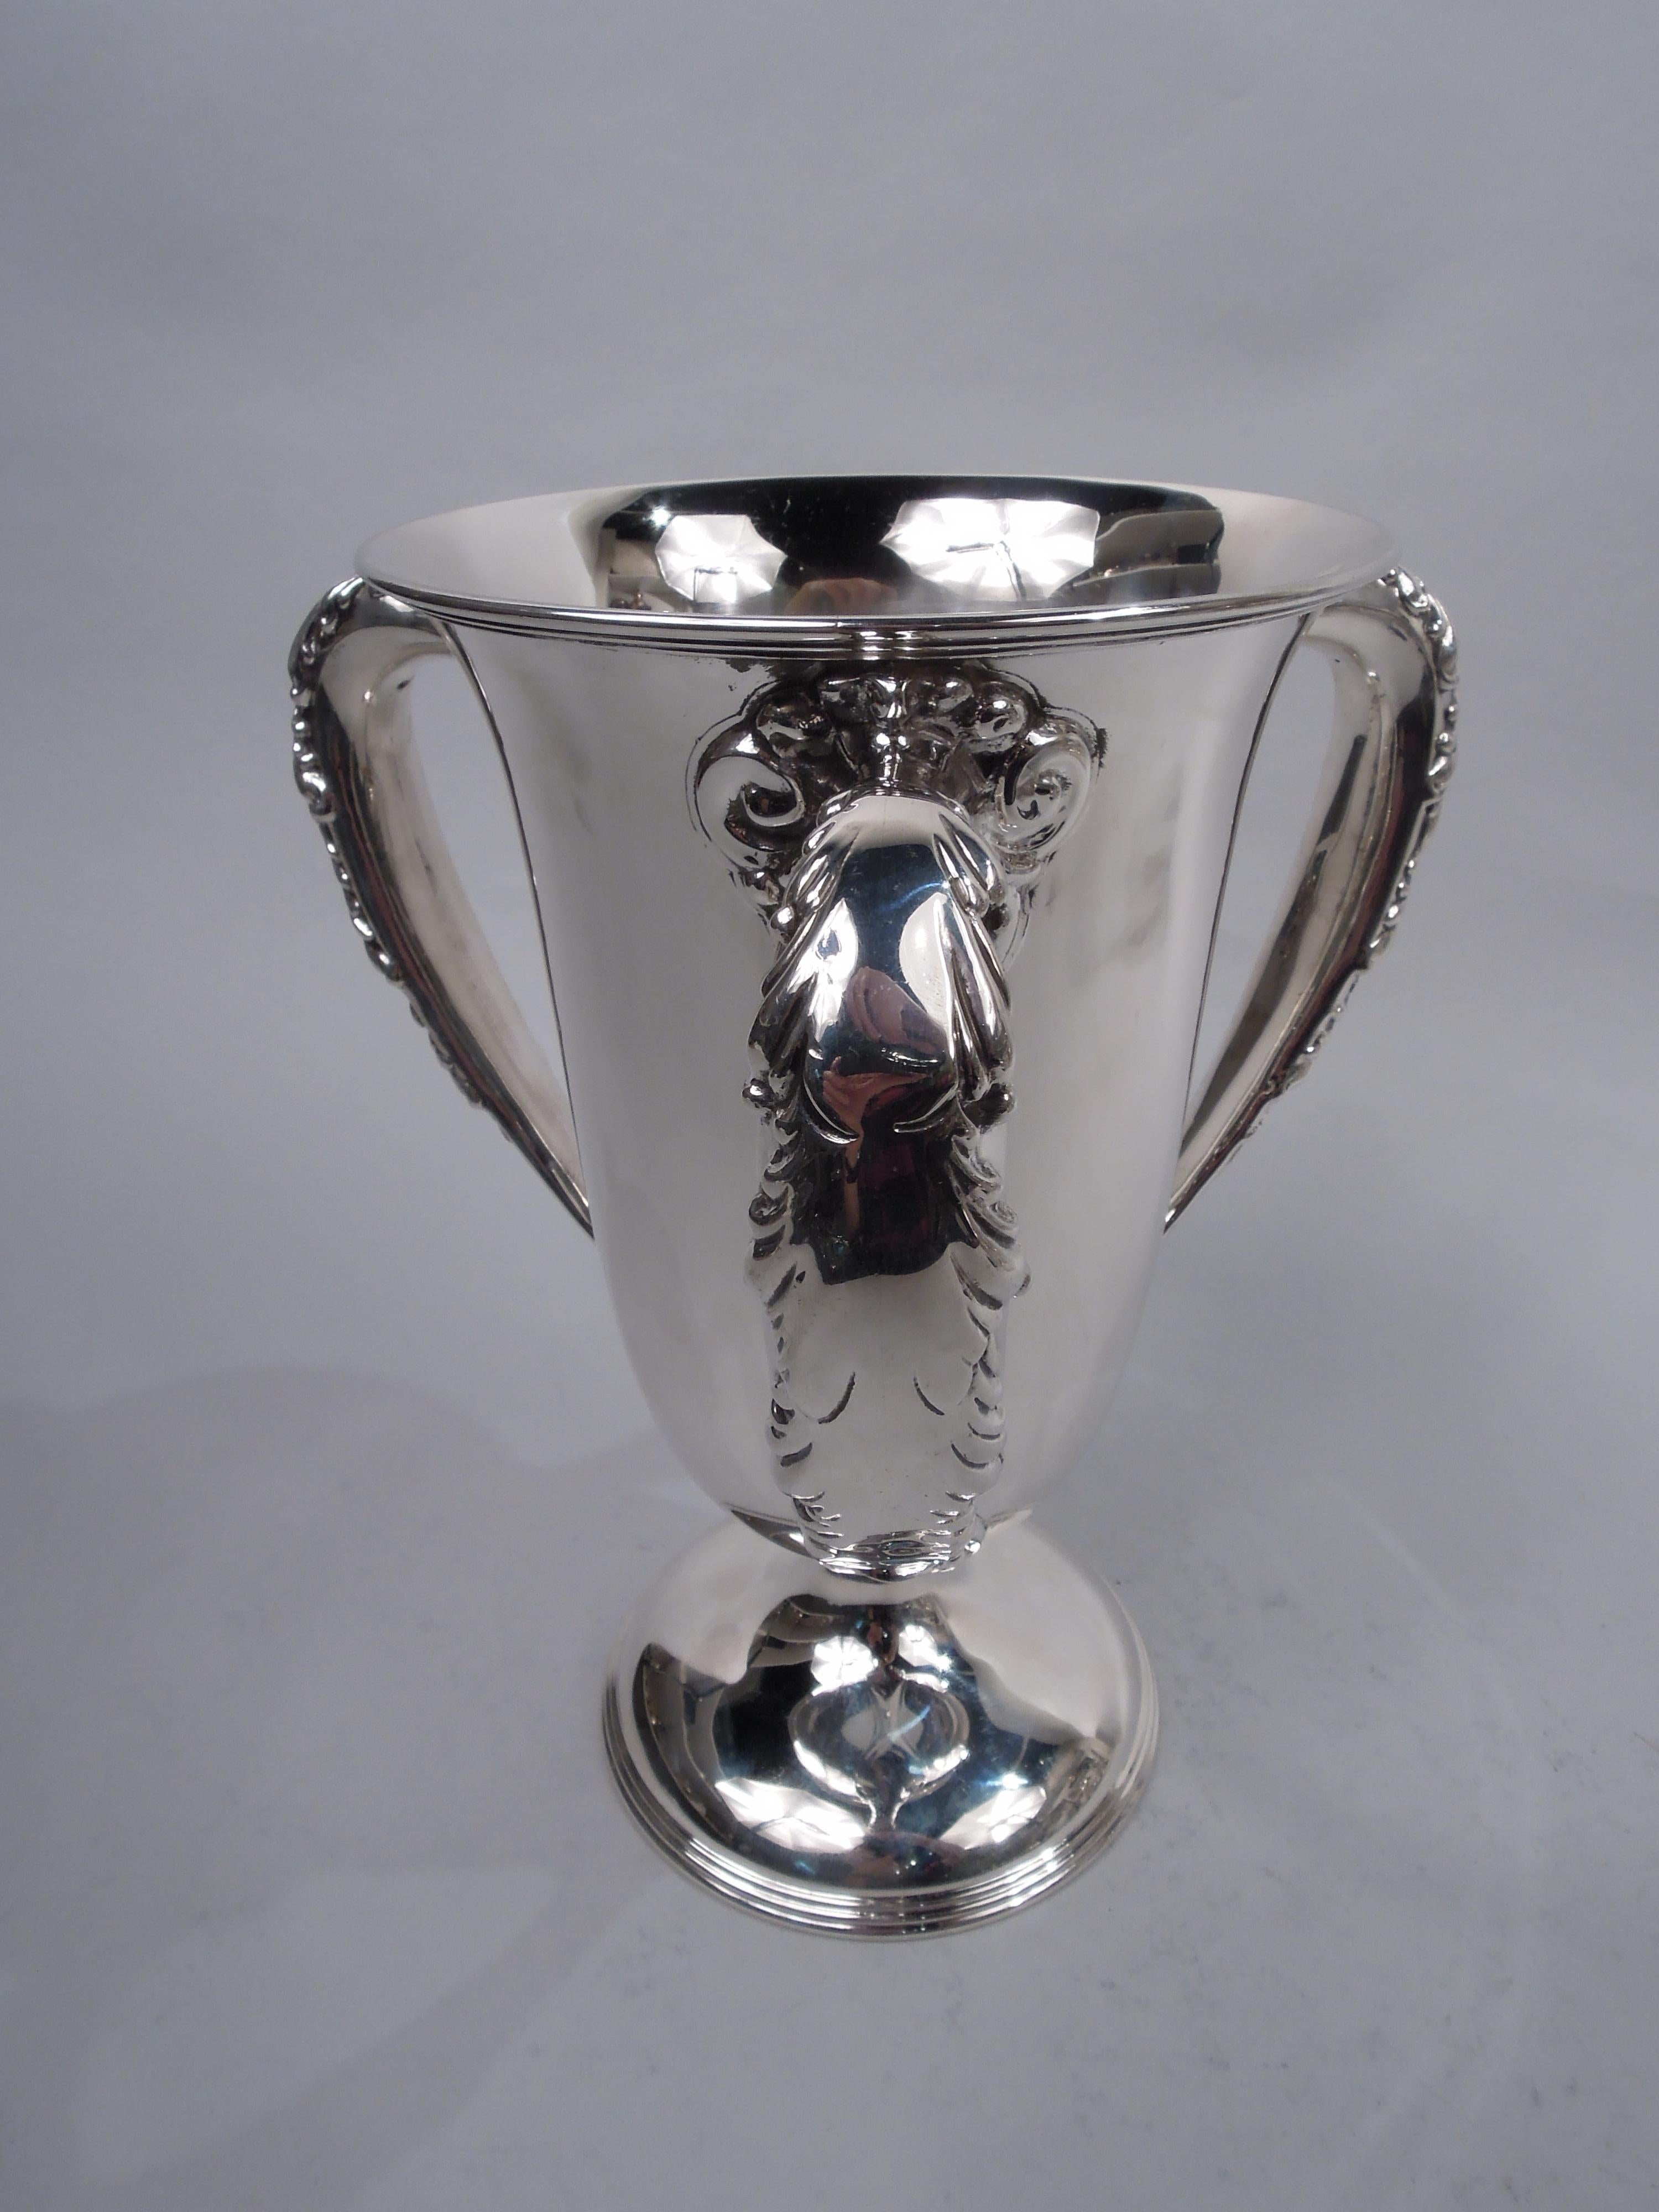 American Edwardian Classical sterling silver loving cup, ca 1910. Tapering bowl with flared rim and curved bottom on reeded domed foot; three leaf-wrapped and scroll-mounted handles. Elegant form with plenty of room for engraving. Fully marked